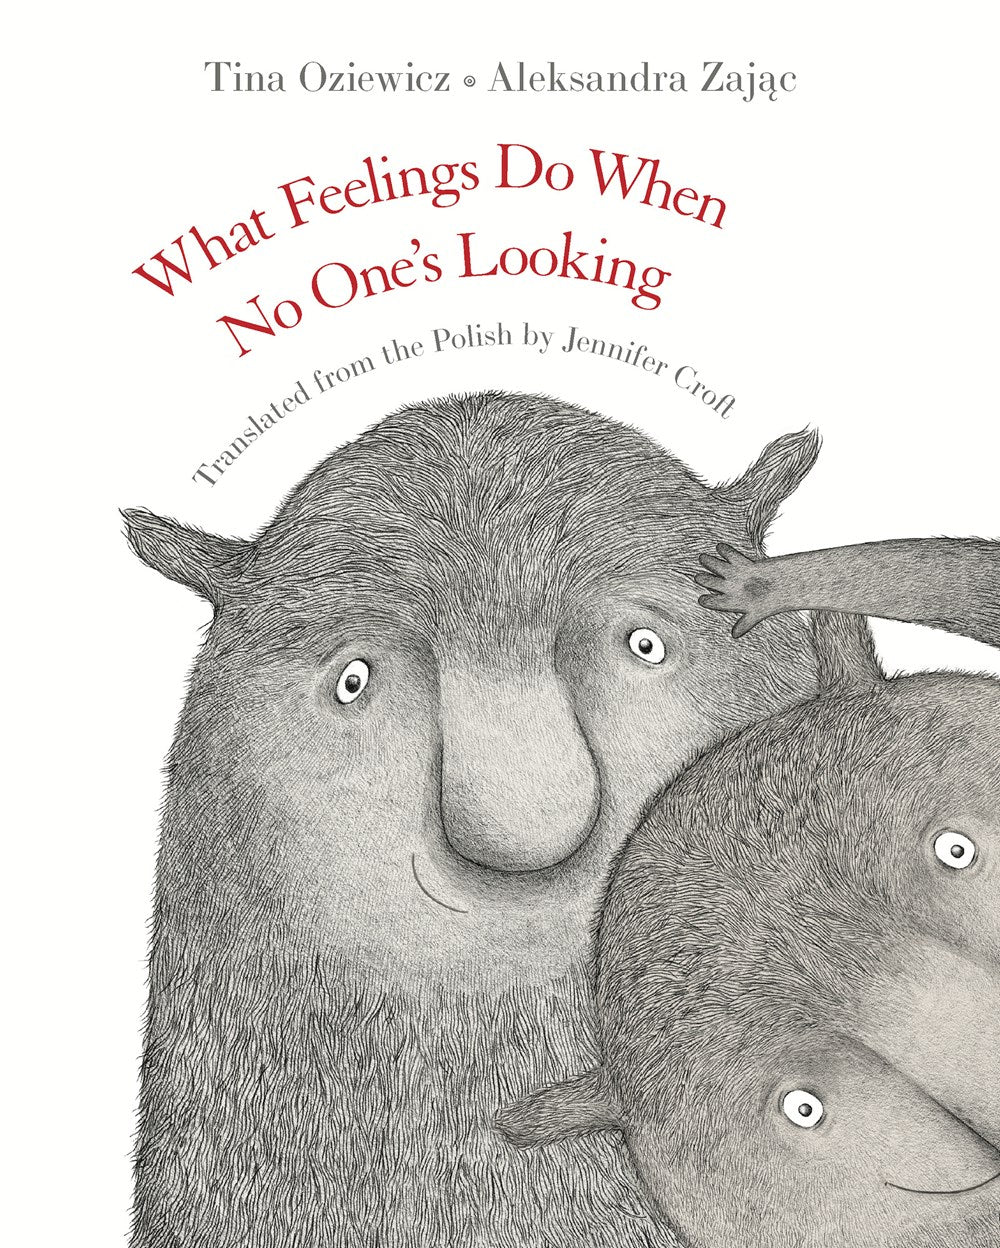 What Feelings Do When No One's Looking by Tina Oziewicz & Illustrated by Aleksandra Zajac (Translated by Jennifer Croft)